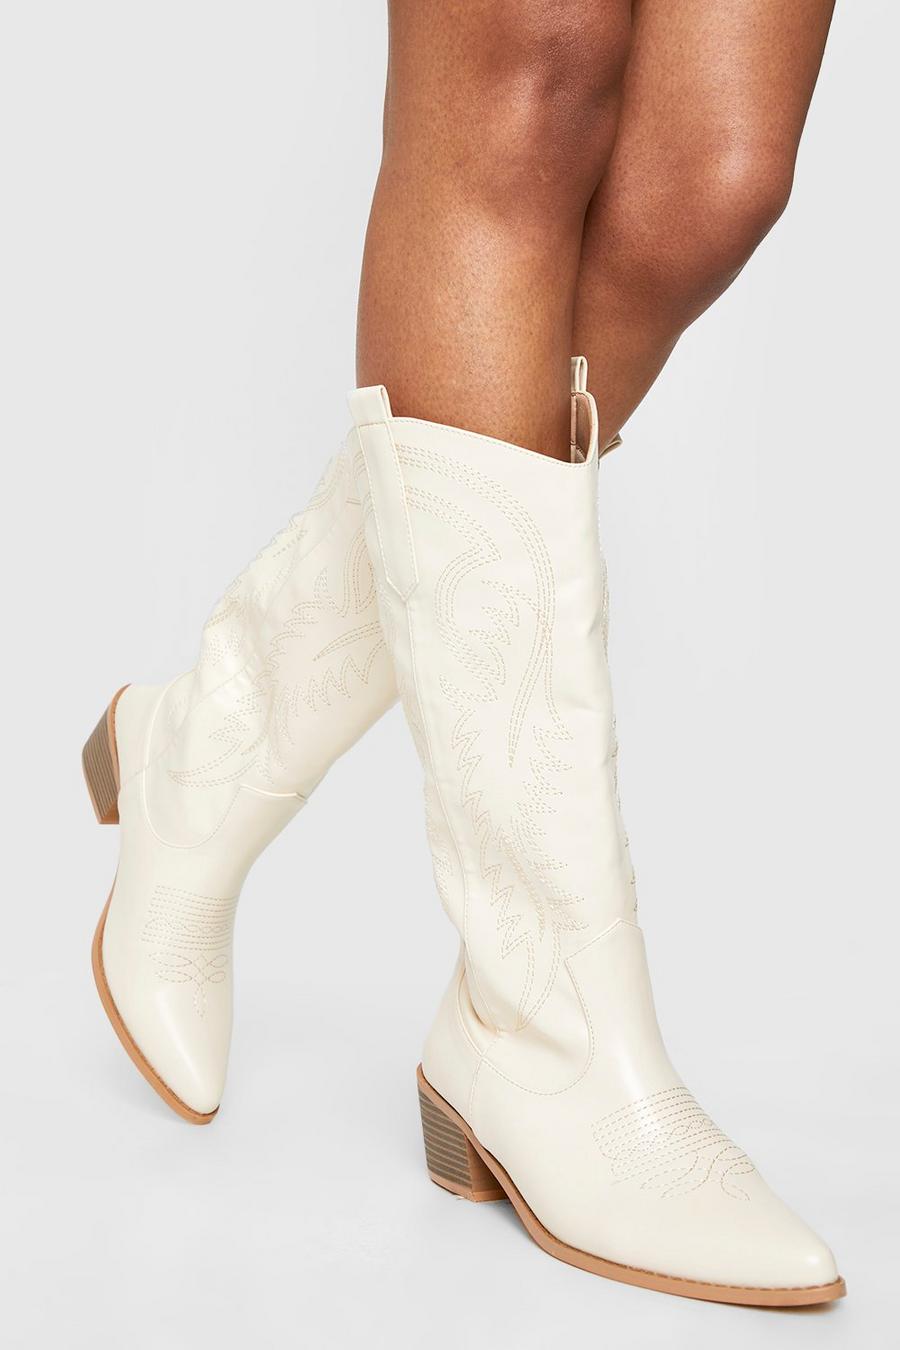 Stone Calf Detail Embroidered Western Cowboy Boots